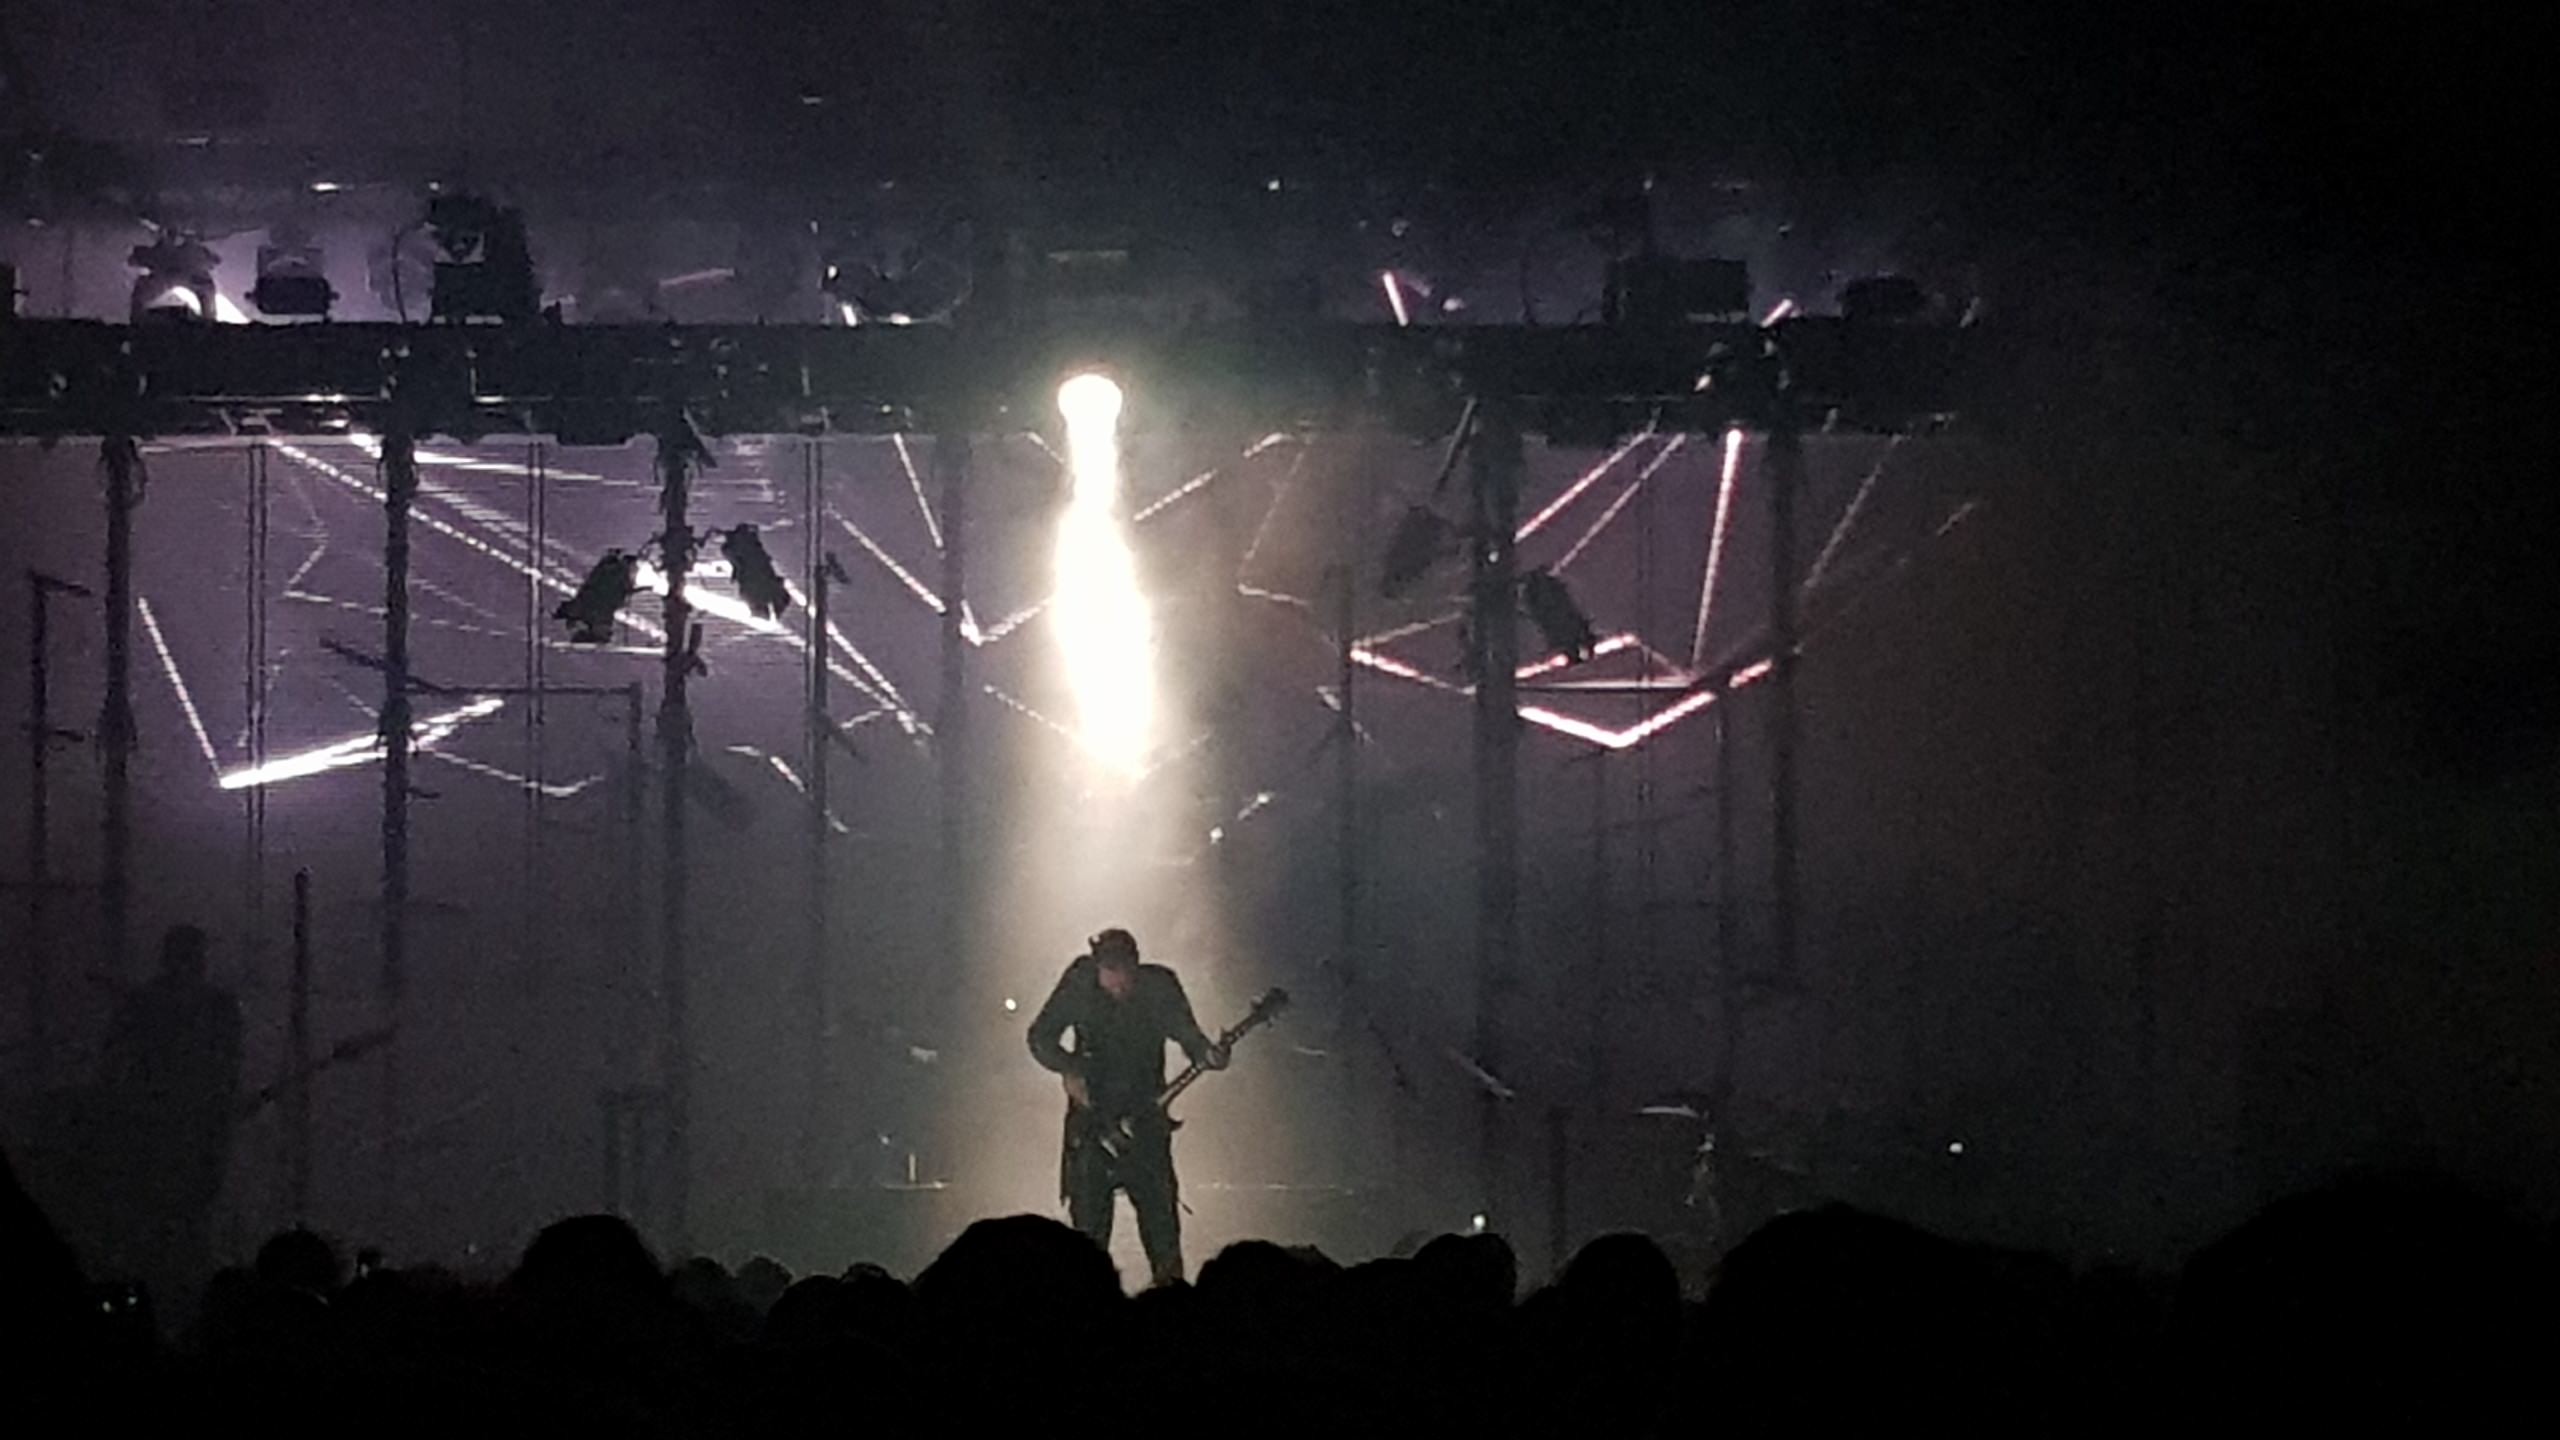 2560x1440 ... see Sigur Ros again. At Hordern Pavillion, Sydney, Australia. ...  apologies for the terrible picture quality... but if you ever get the  chance to see ...